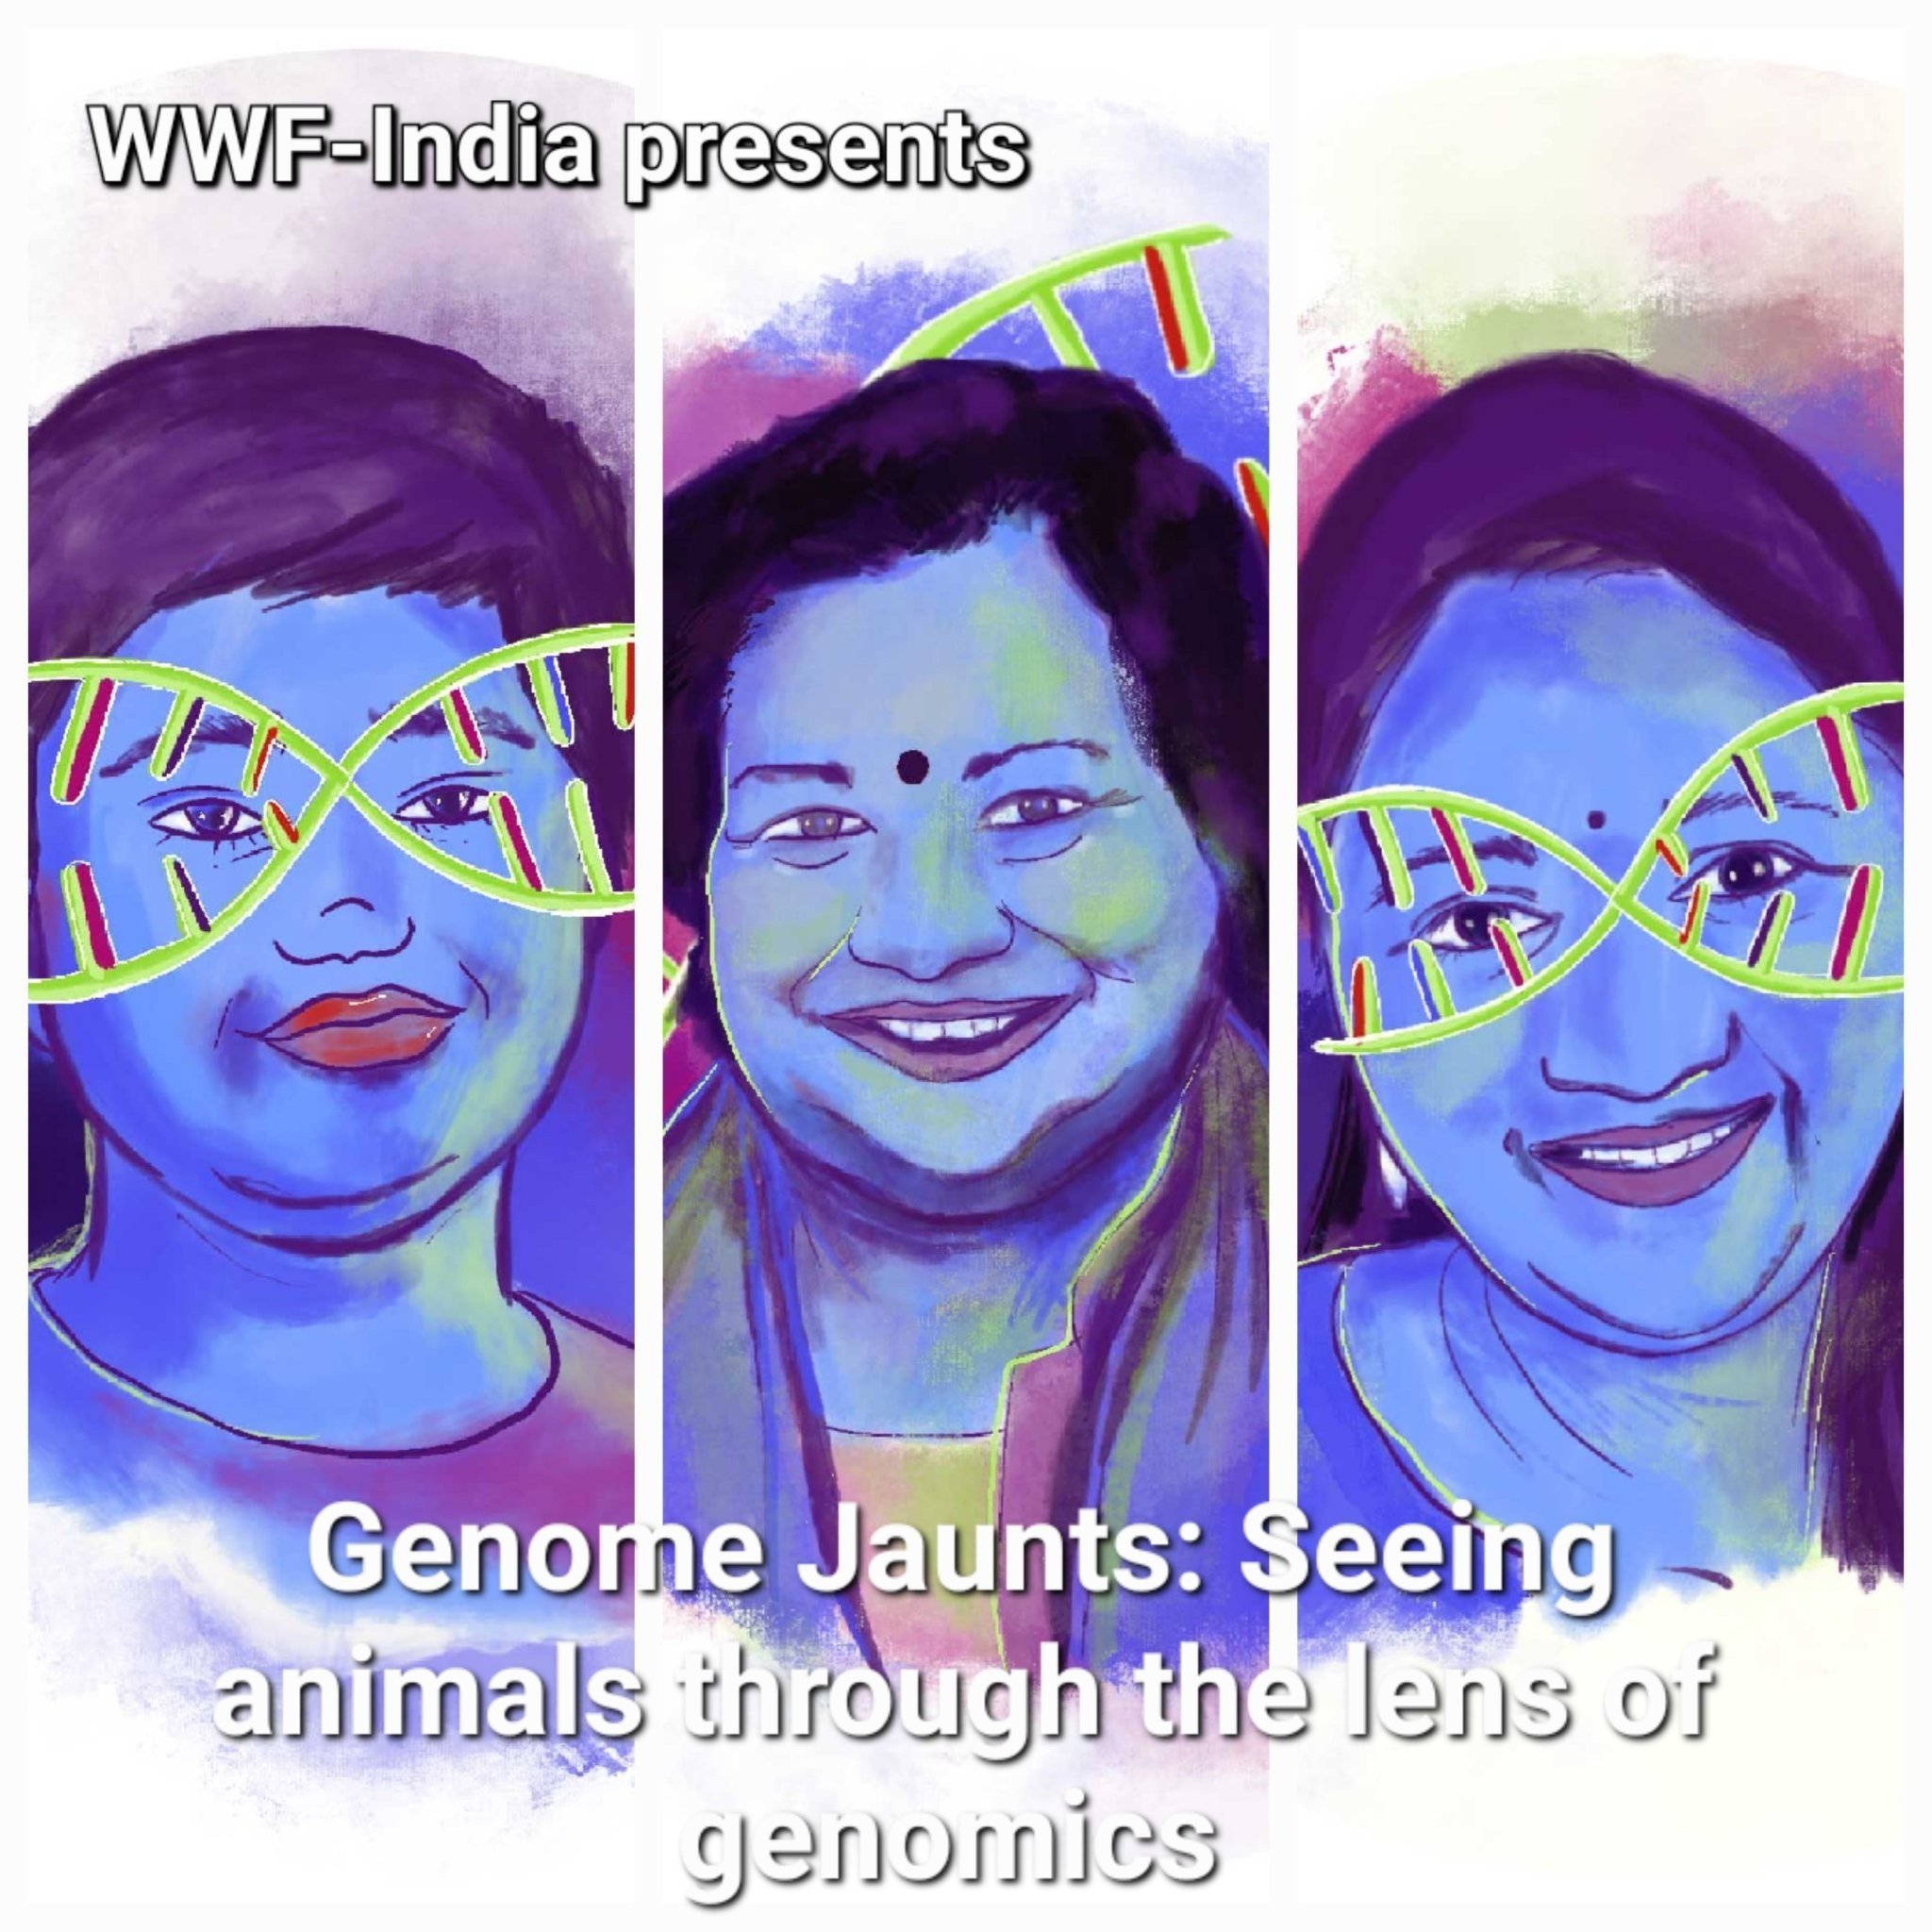 The illustrator of Genome Jaunts, Surbhi Badhani, has used a colorful and interactive format for the contents to captivate and engage young readers in the matters of animals and genes described in the book.